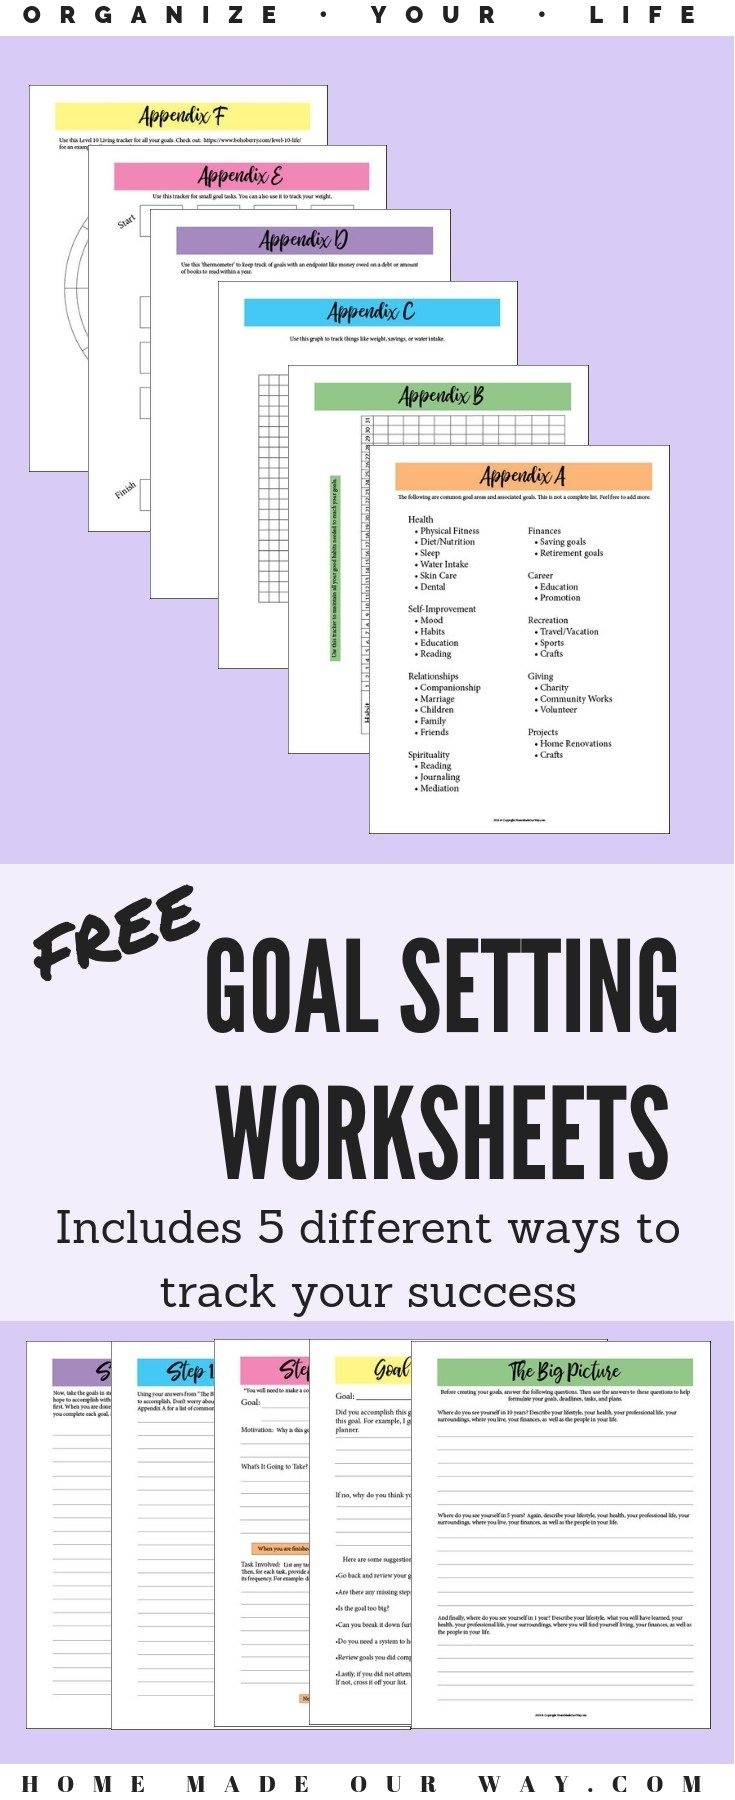 Free Goal Setting Worksheets For A Successful Year Any Time | Home - Free Printable Home Organization Worksheets